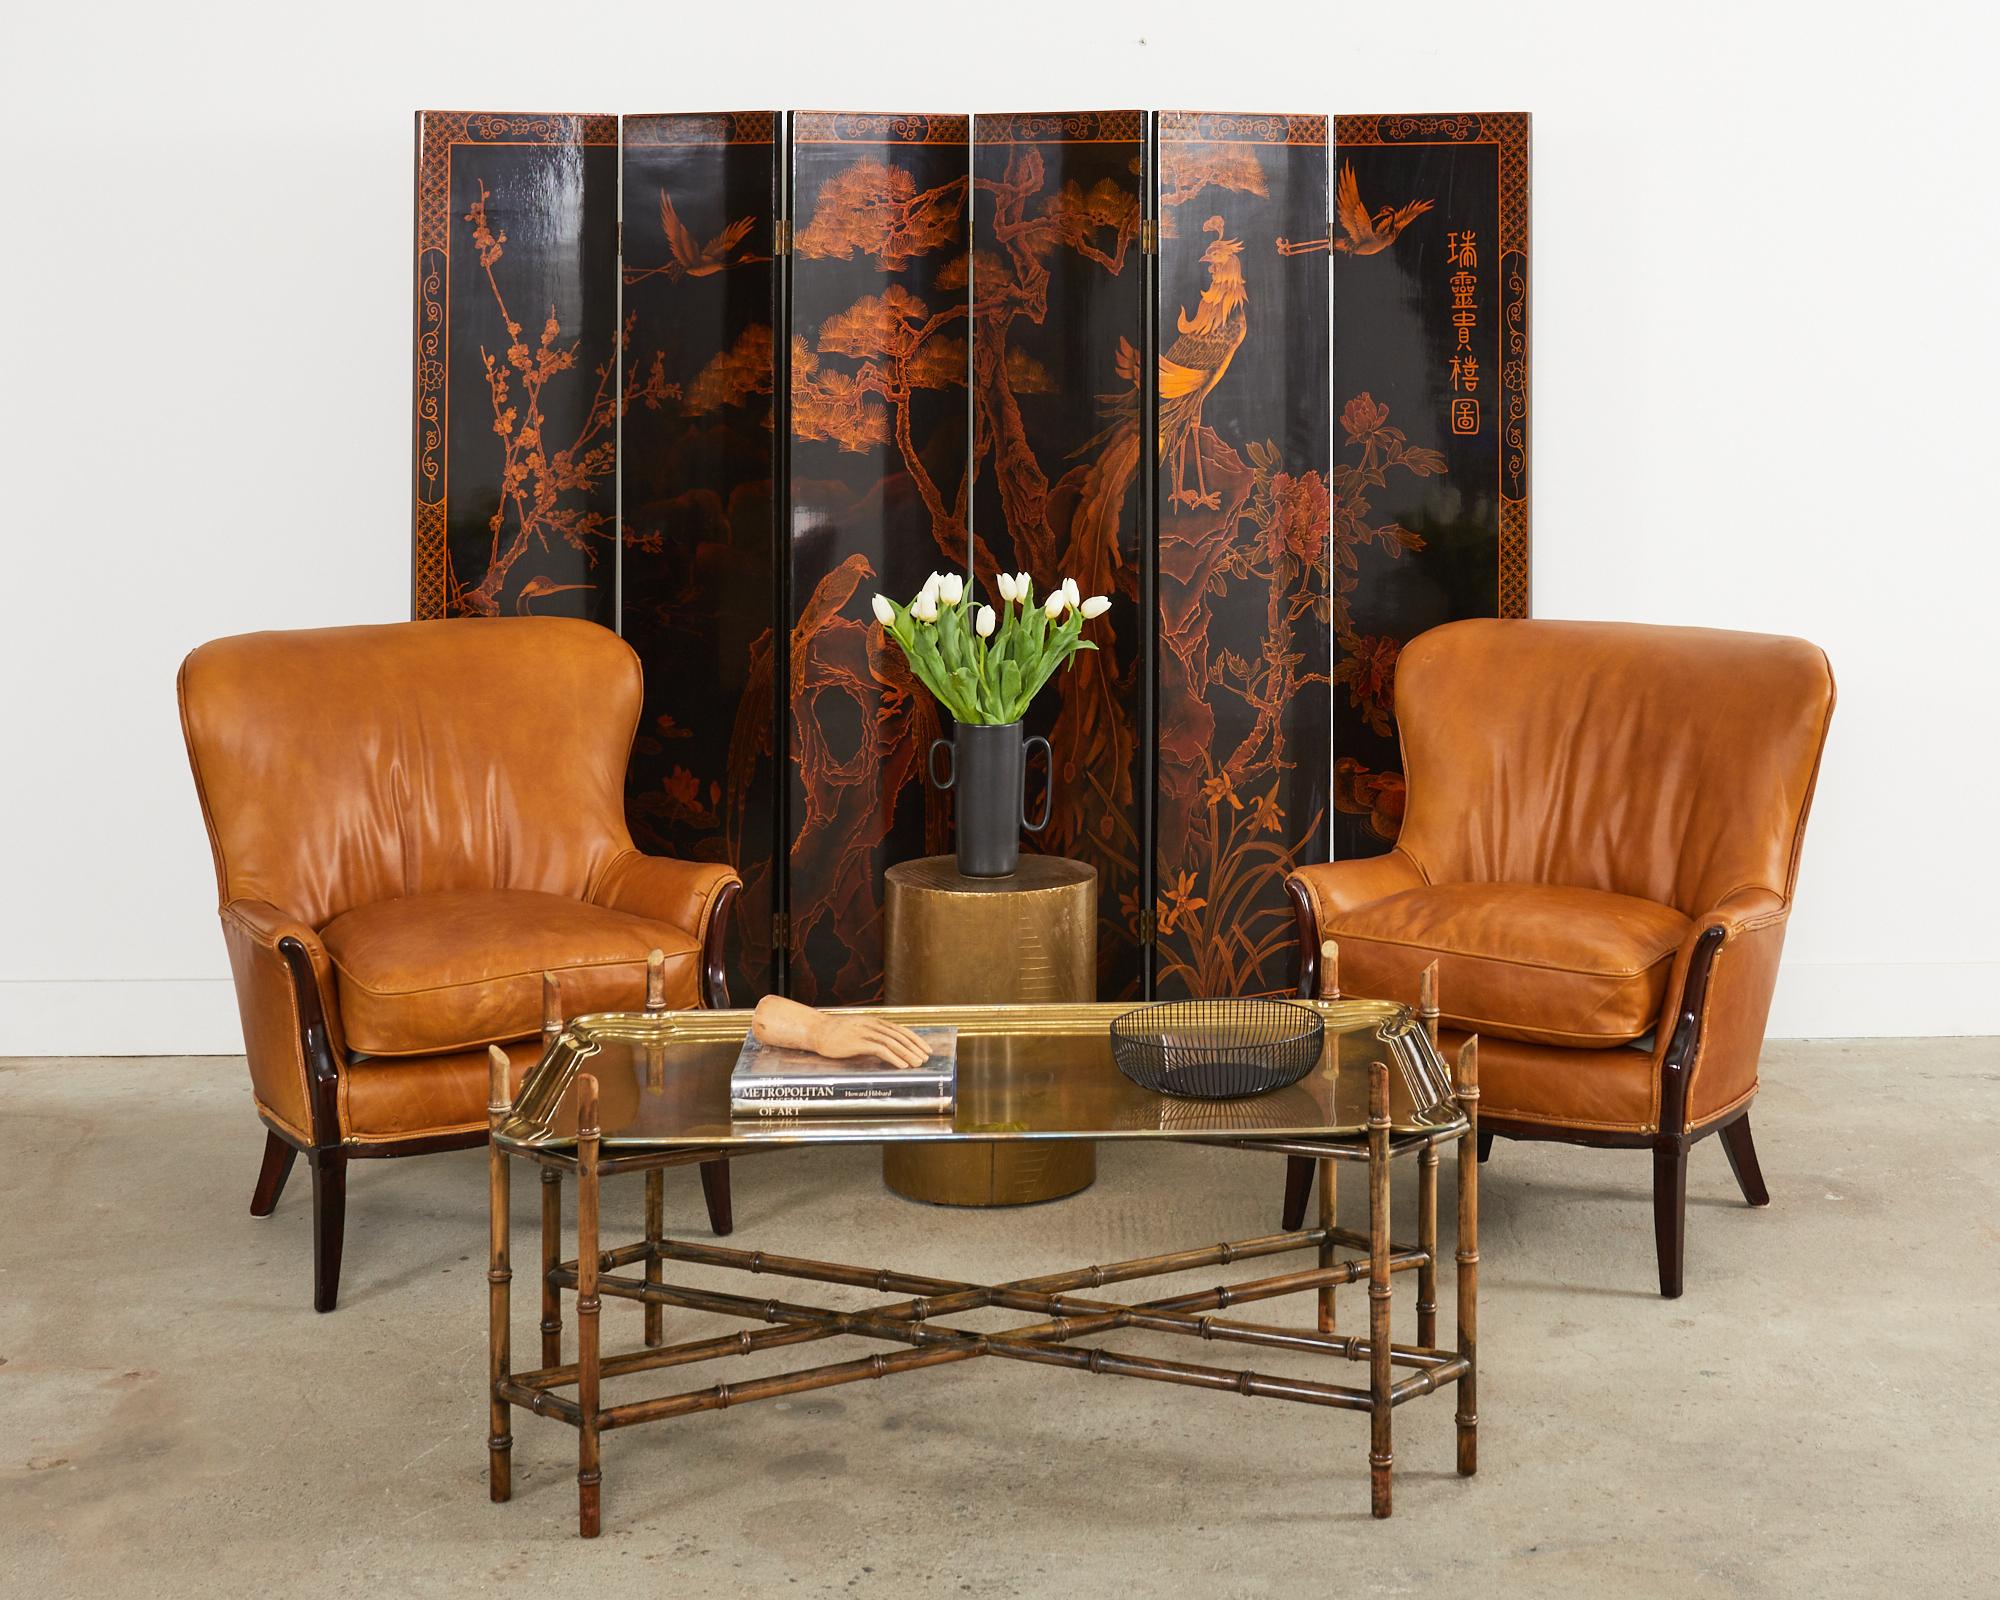 Dramatic Chinese export six-panel folding coromandel style floor screen featuring an idyllic landscape with exotic and mythical birds. The lacquered panels are intricately painted with an amber or burnt orange tone over a black ground with a gloss